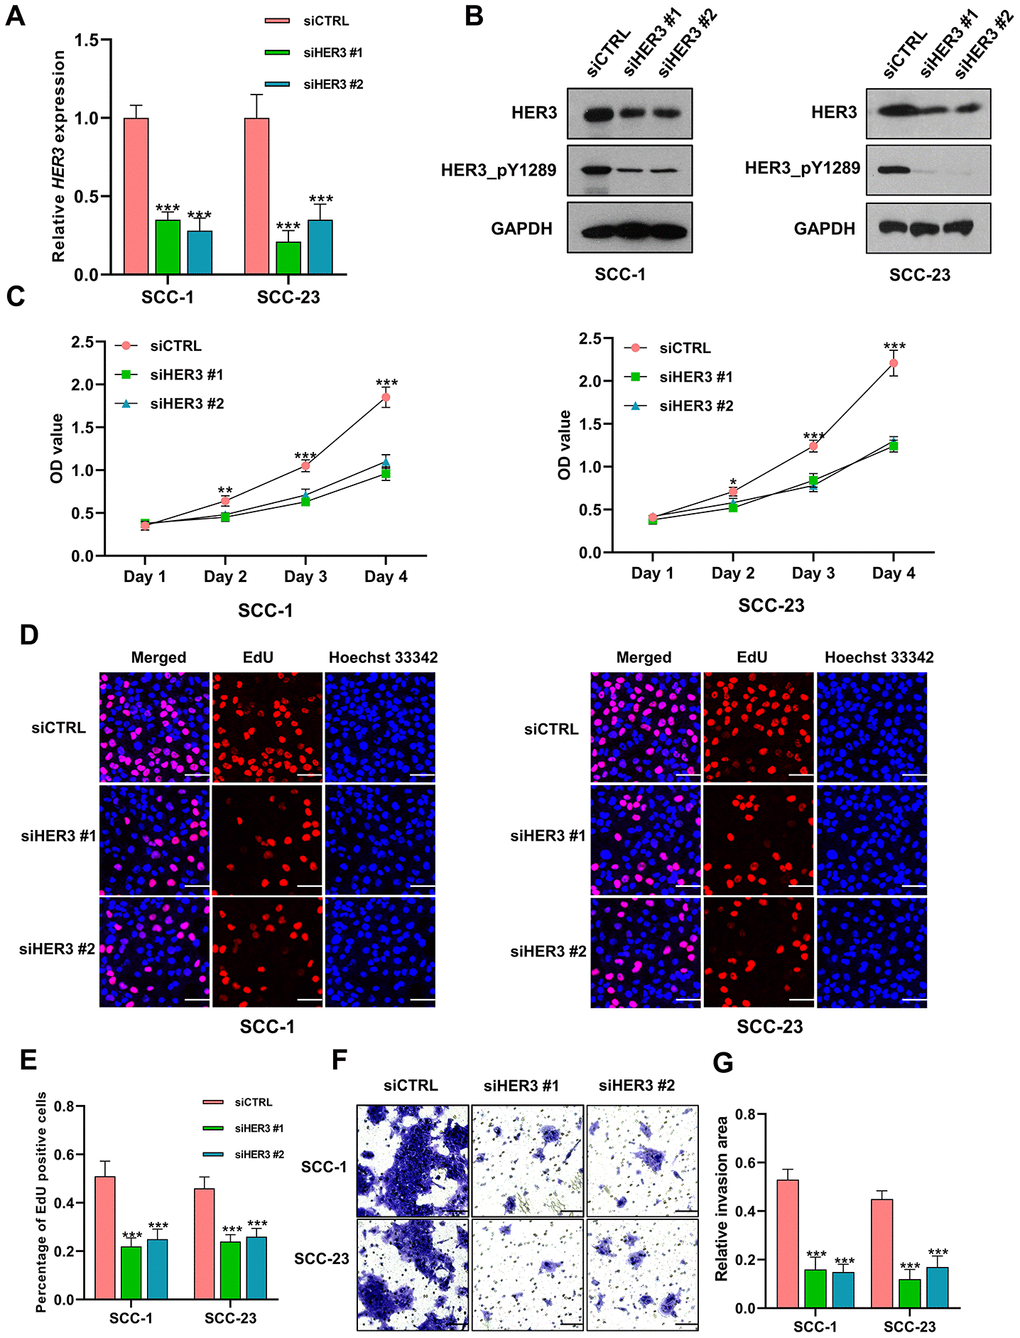 Knockdown of HER3 suppresses the proliferation and invasion of HNSCC cells. (A) The expression level of HER3 mRNA is significantly lower in siHER3 treated cells compared to the siCTRL treated cells. (B) Western blot shows that the levels of HER3 and HER3